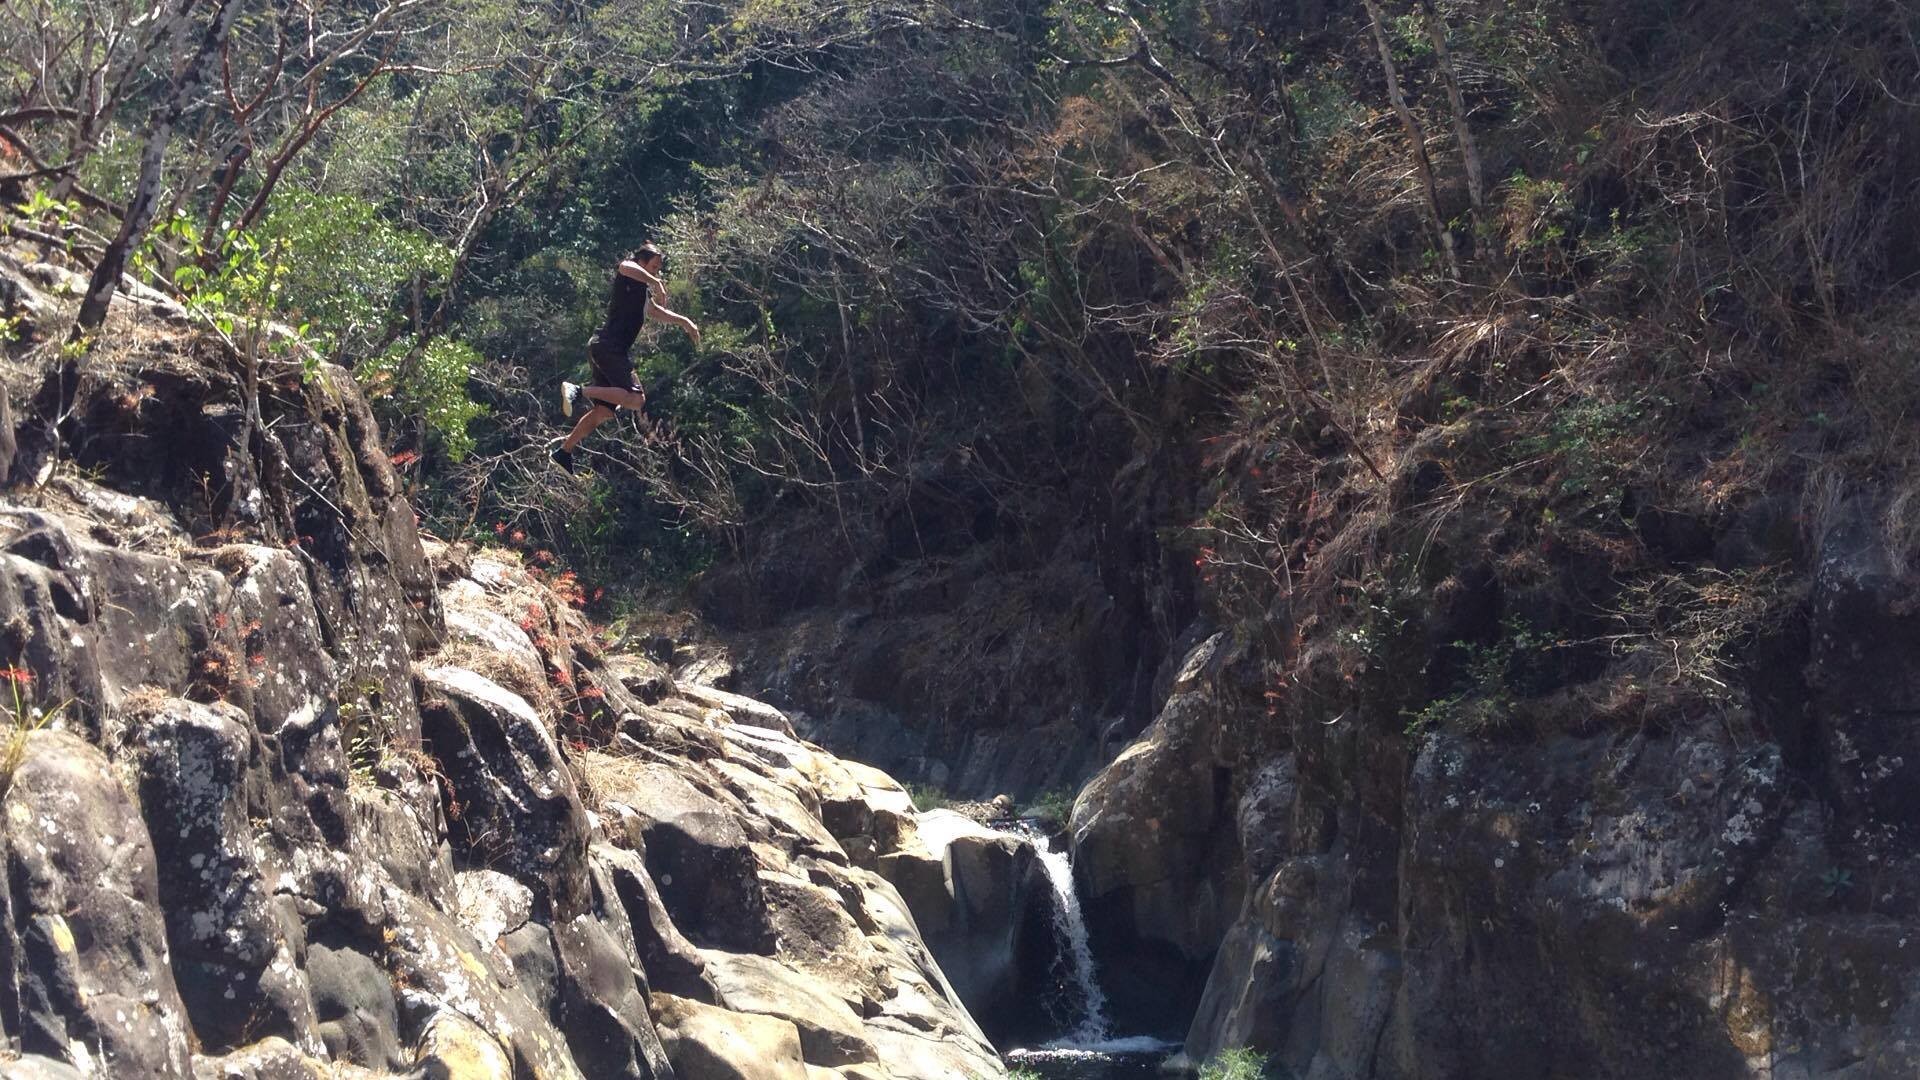 1920x1080 El Salvador canyoning and waterfall hiking in El Imposible image by Tamsin  Ross Van Lessen